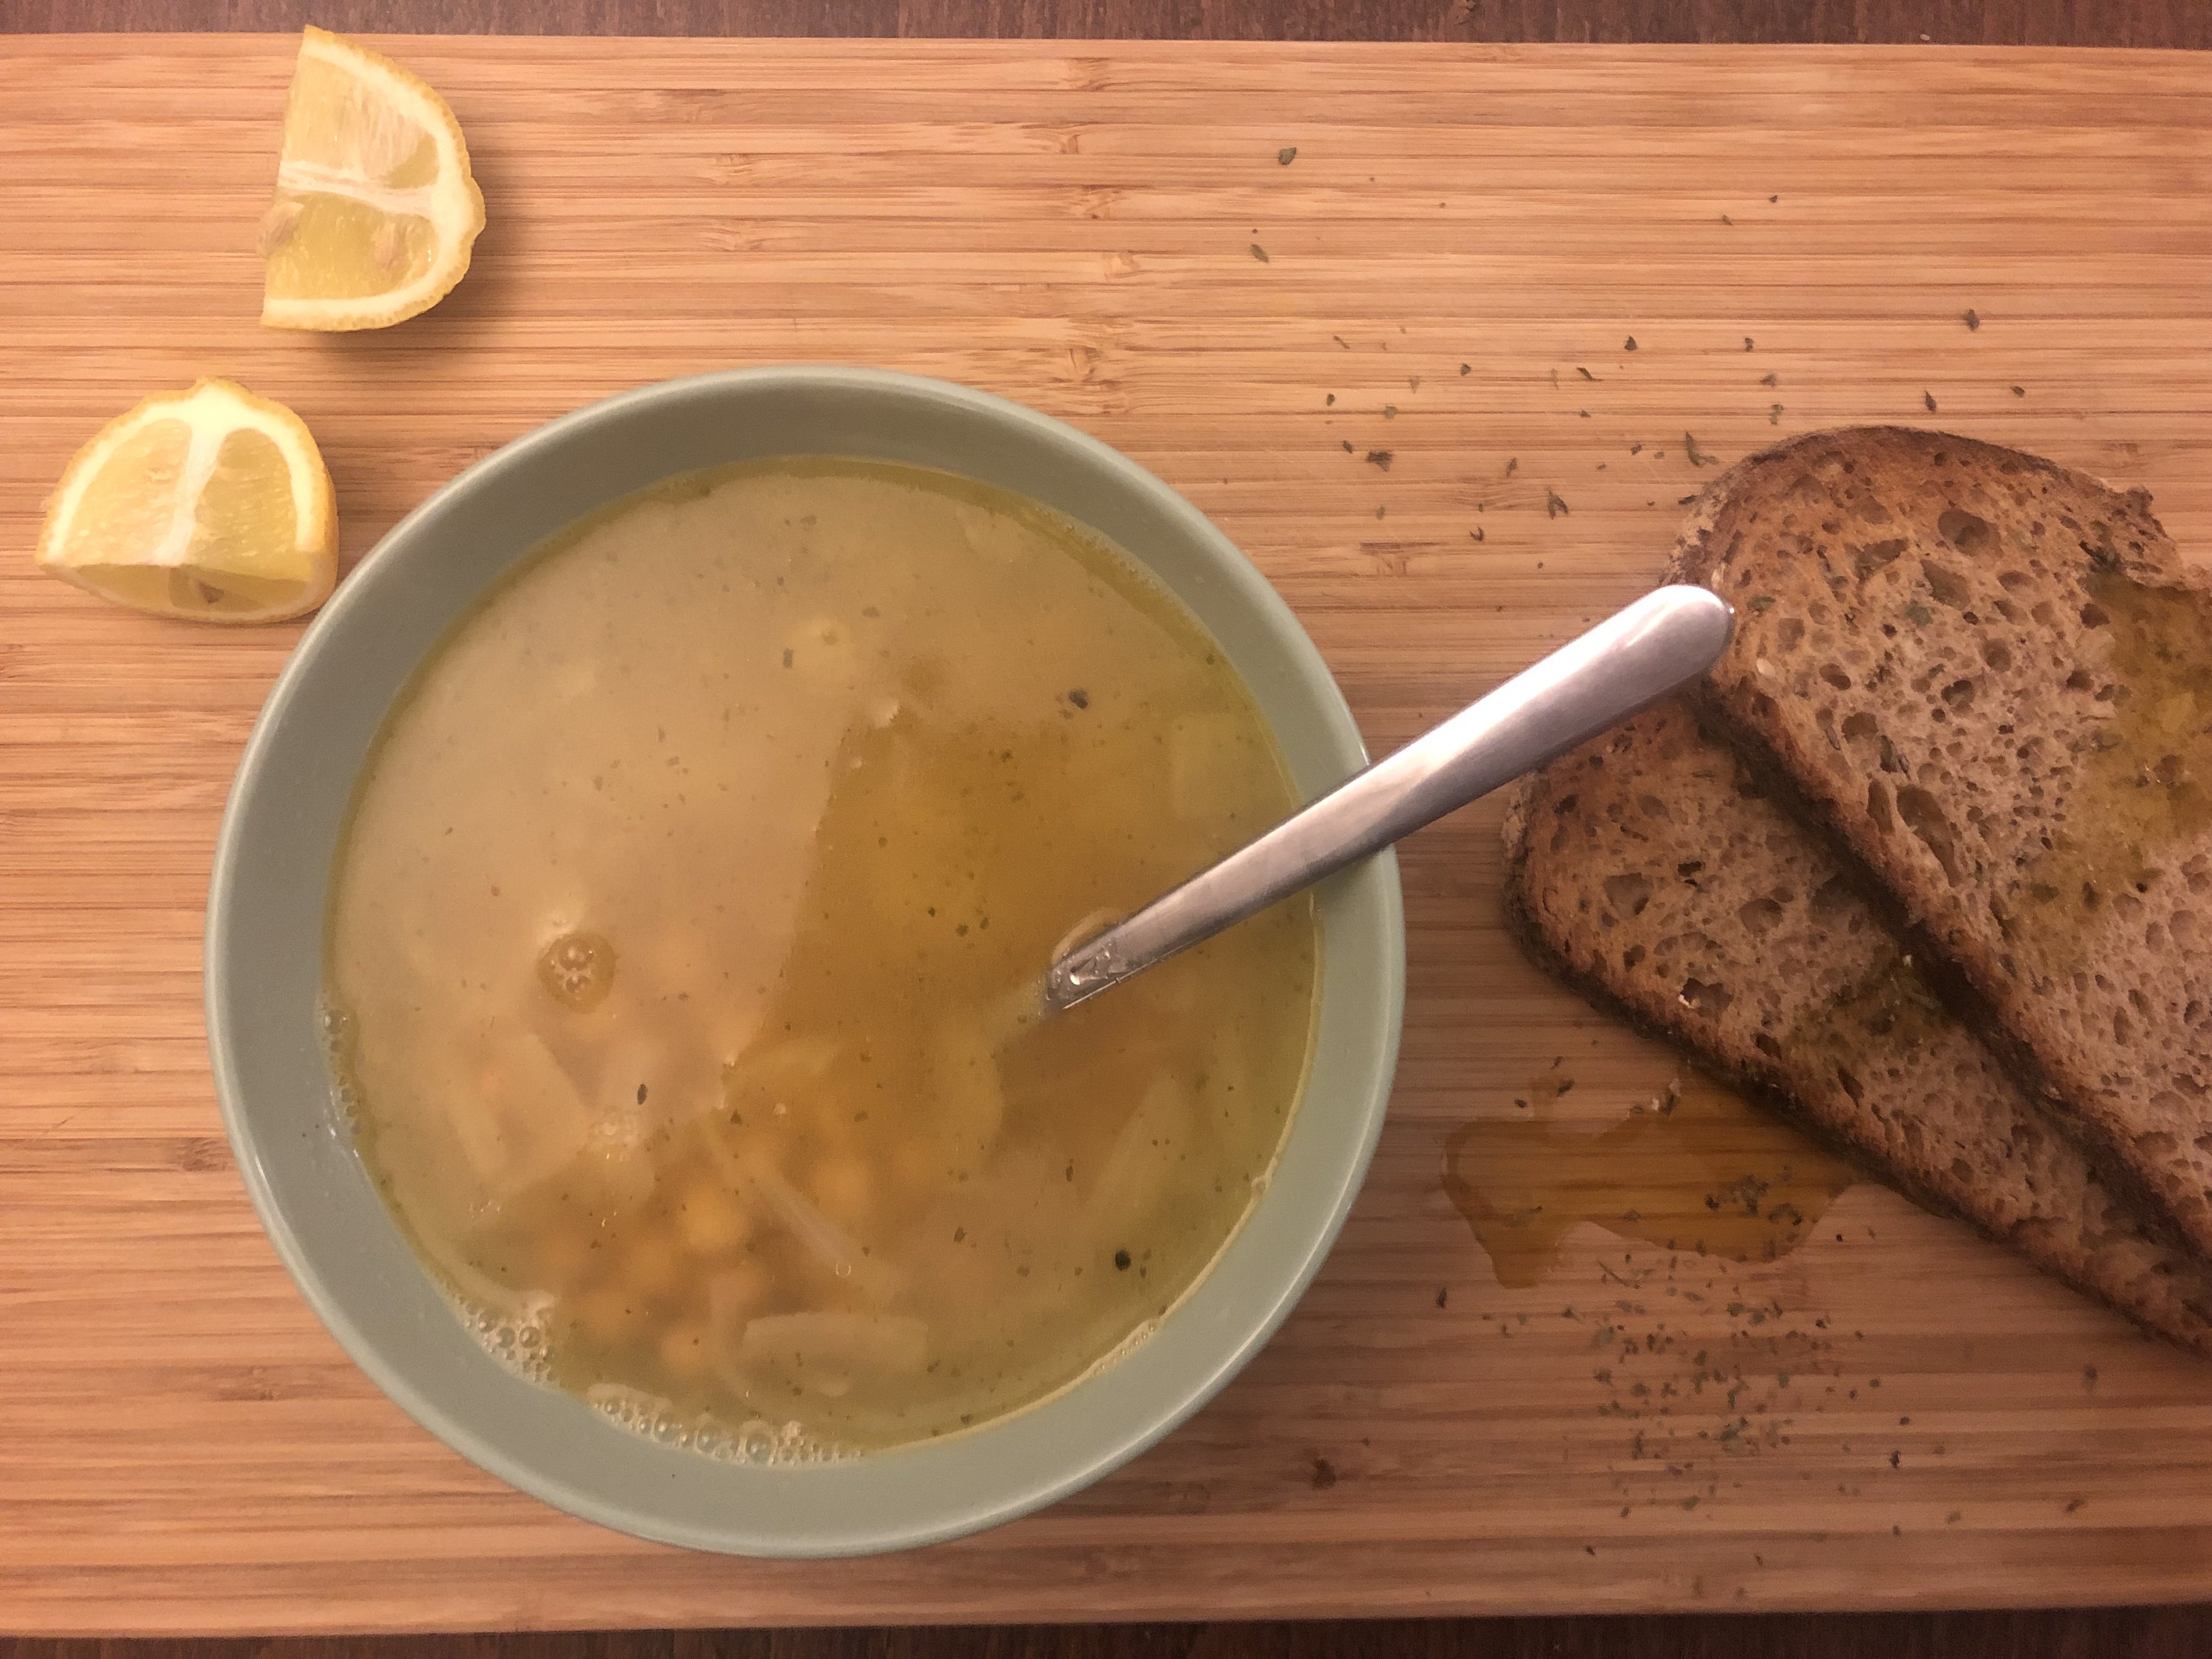 Hot chickpea soup recipe with lemon